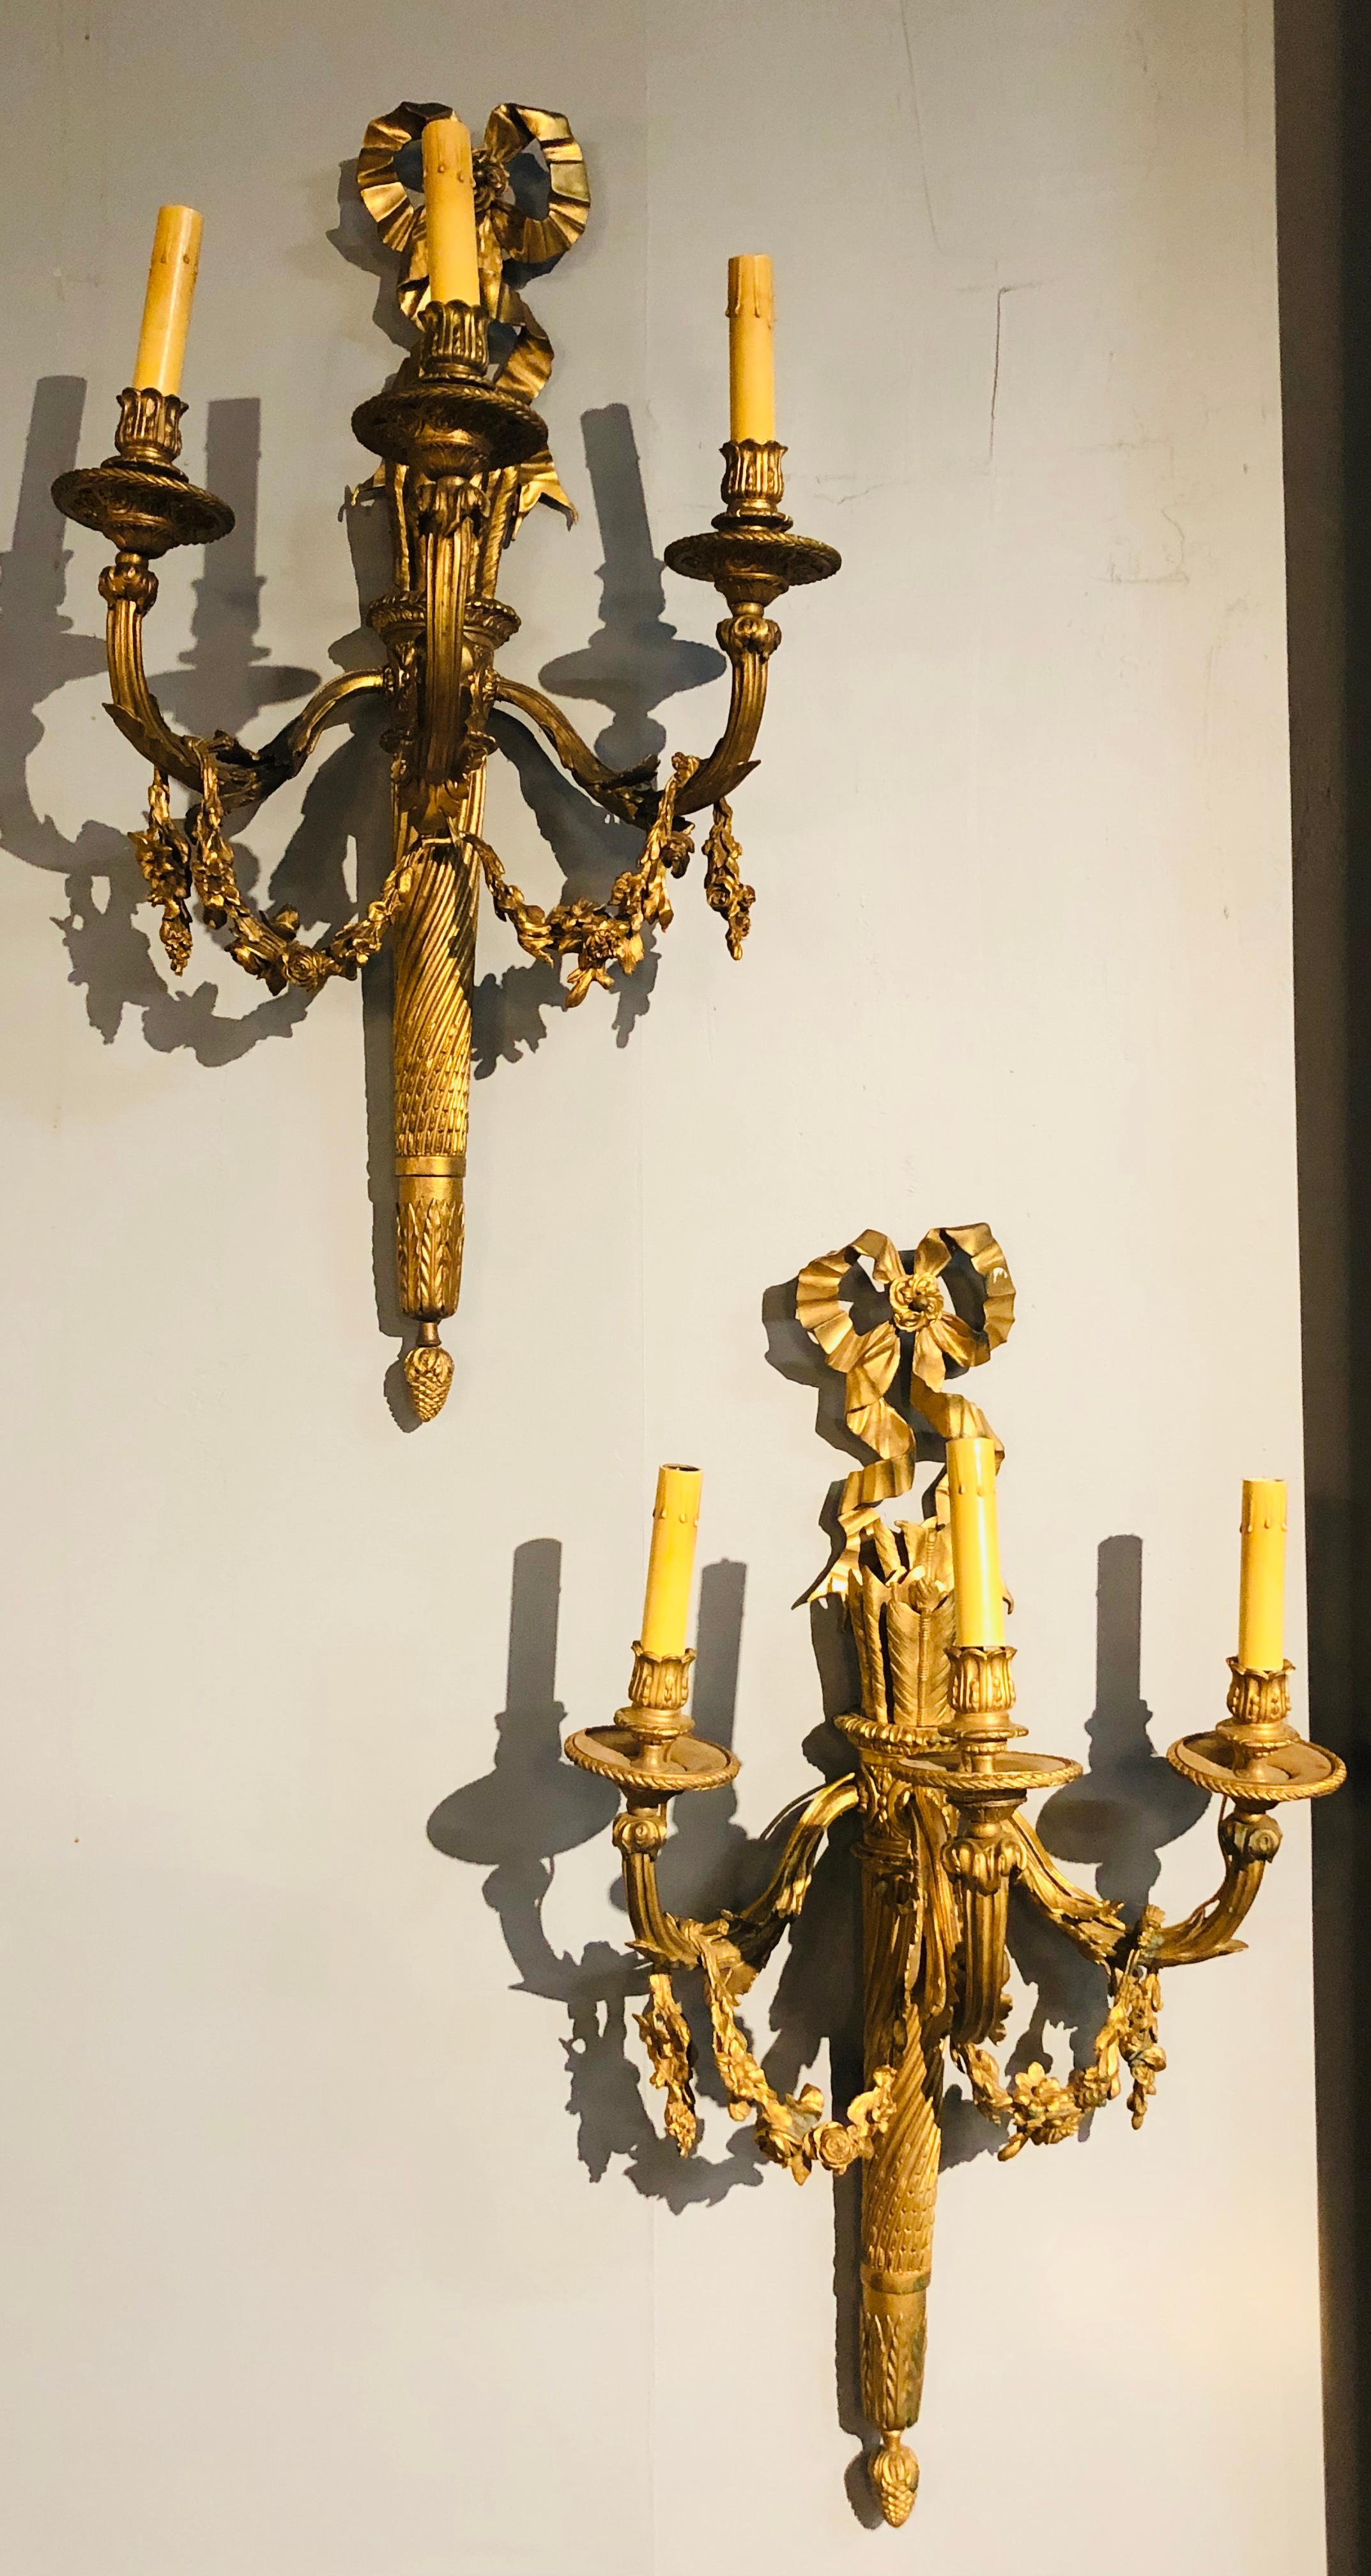 Set of four large and impressive Louis XVI style ornate three-light torch and ribbon form wall sconces. This listing is for two pair of these finely chiseled gilt bronze wall lights each newly wired taking three bulbs. The torch support having